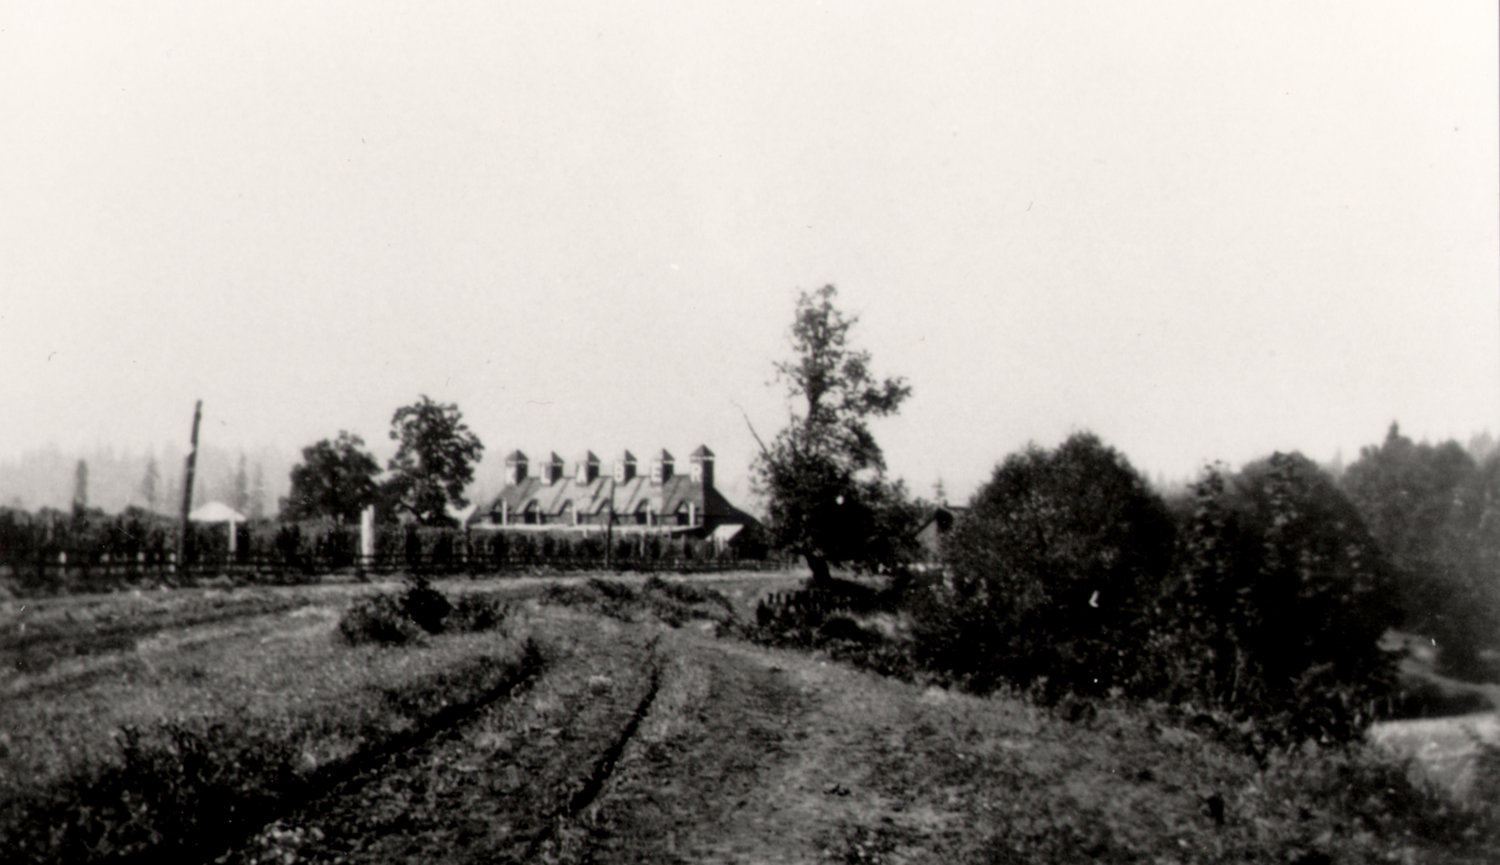 This photo from Hazel Duncan's collection shows the approach to the Klaber hopyard and dry kiln about 1912.